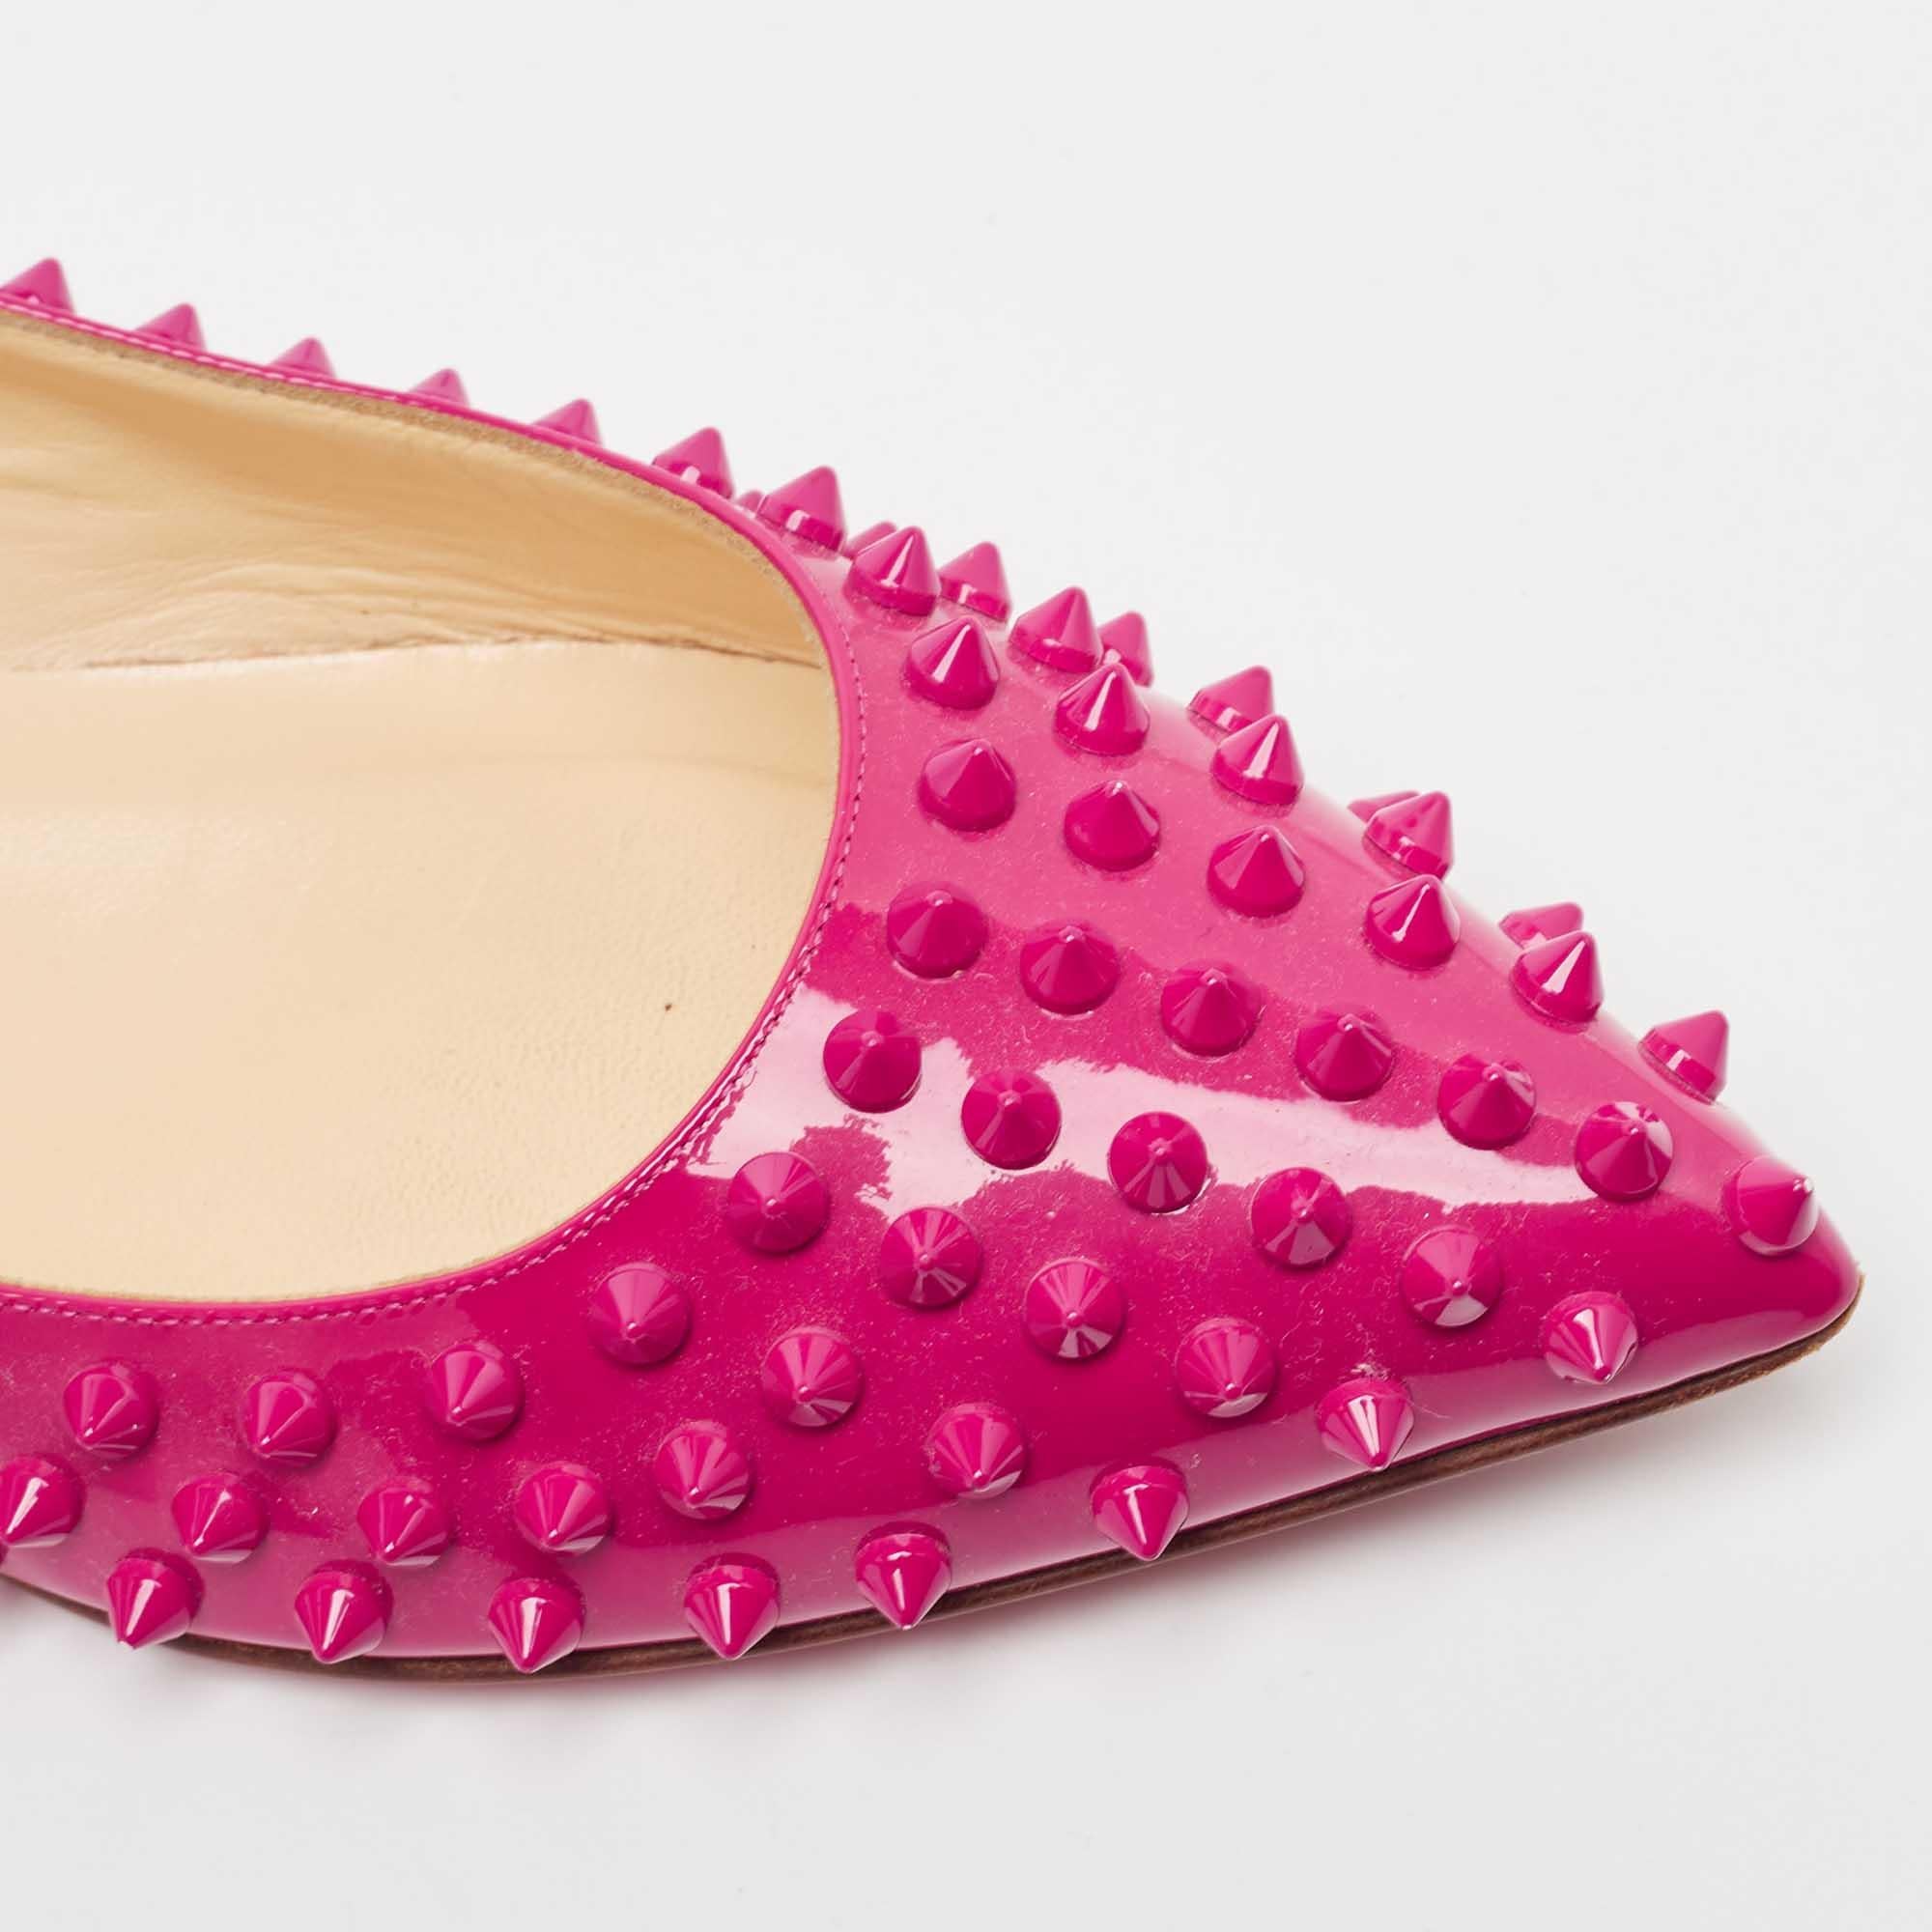 Christian Louboutin Pink Patent Leather Pigalle Spikes Ballet Flats Size 40 For Sale 3